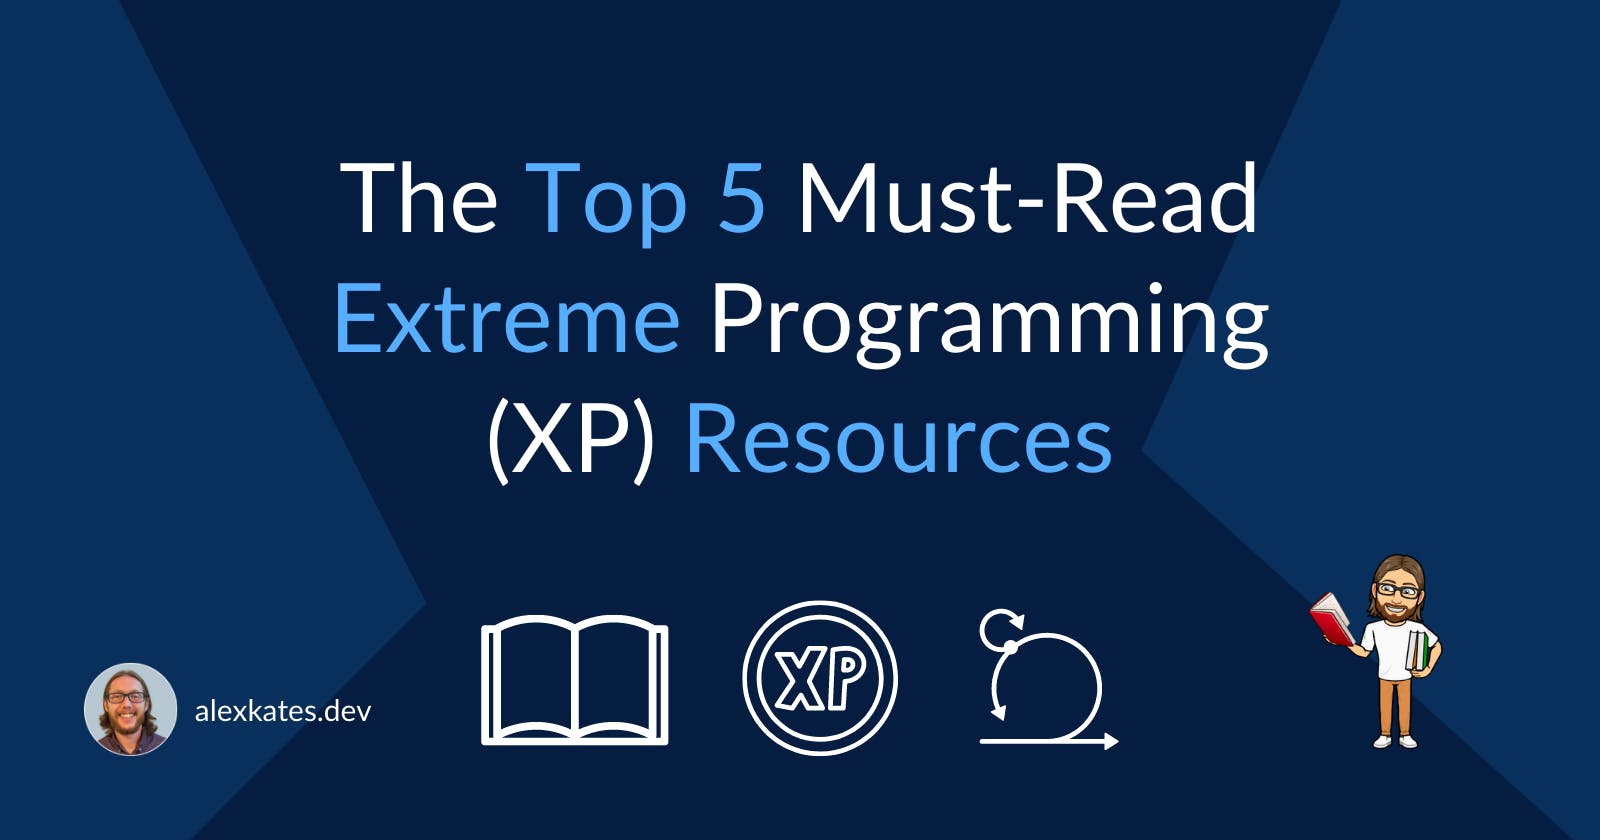 The Top 5 Must-Read Extreme Programming (XP) Resources